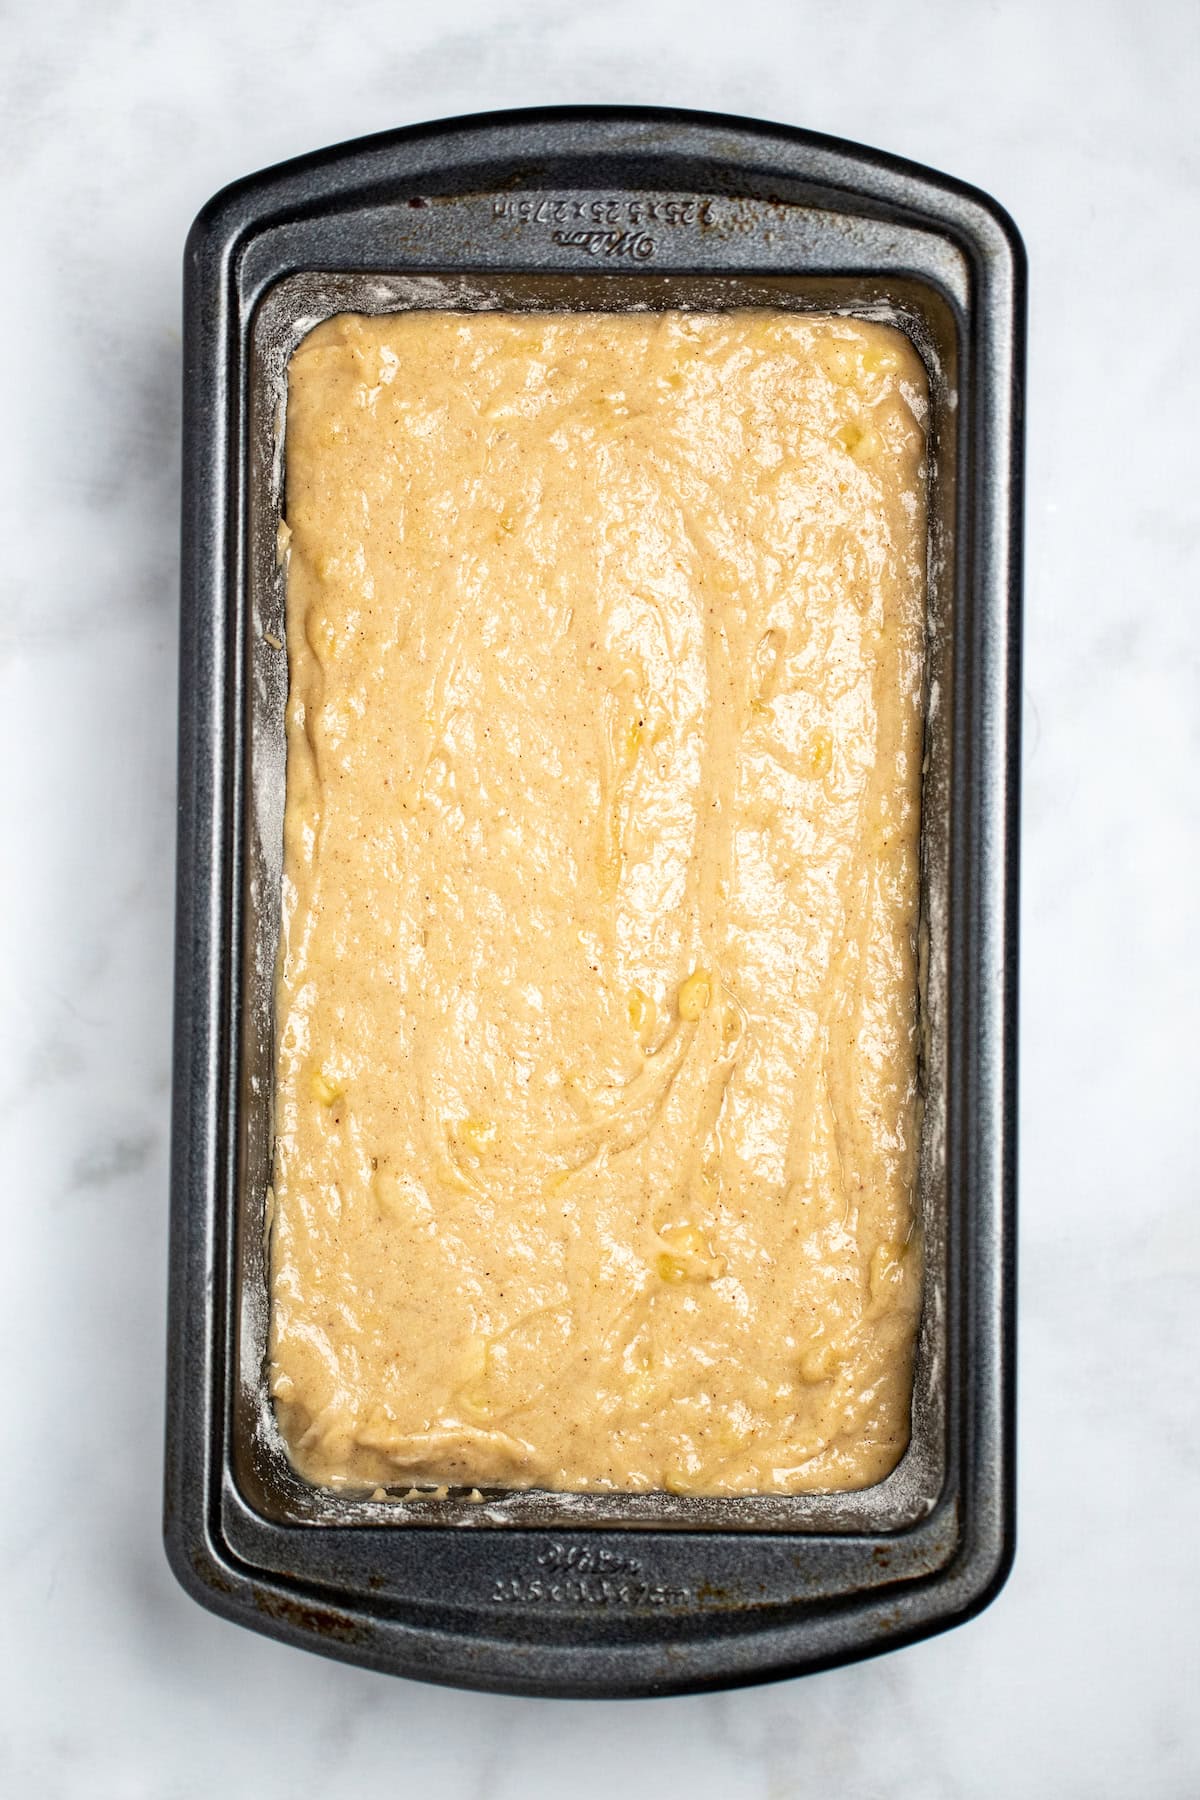 A bread pan full of banana bread batter on a table.